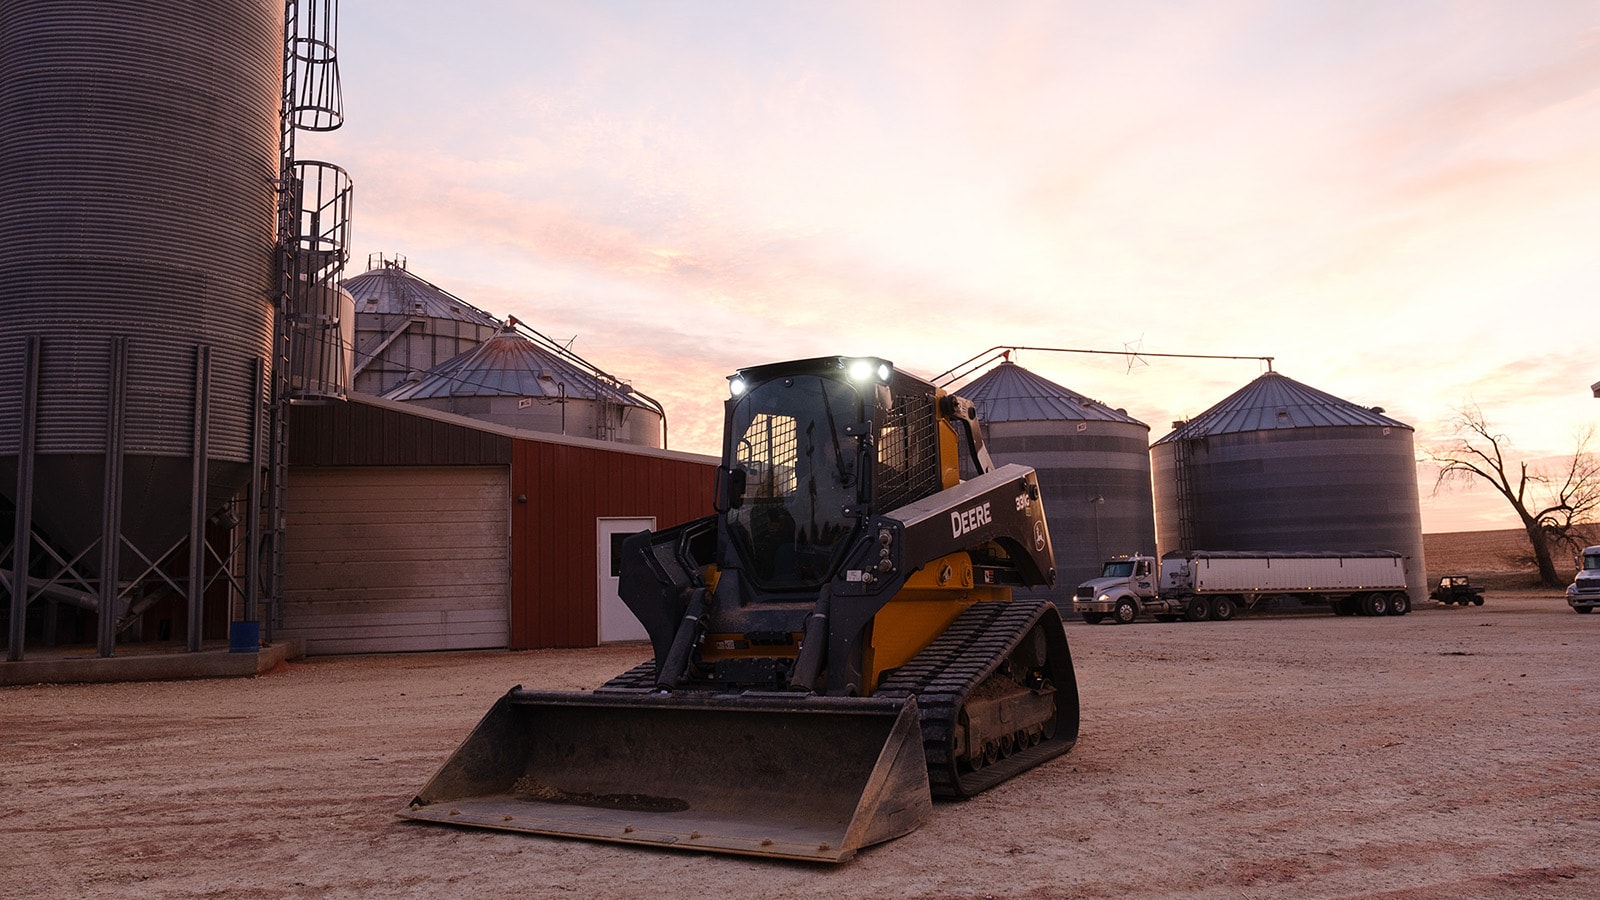 331G Compact Track Loader parked in front of grain bins and storage shed with sunset in the background